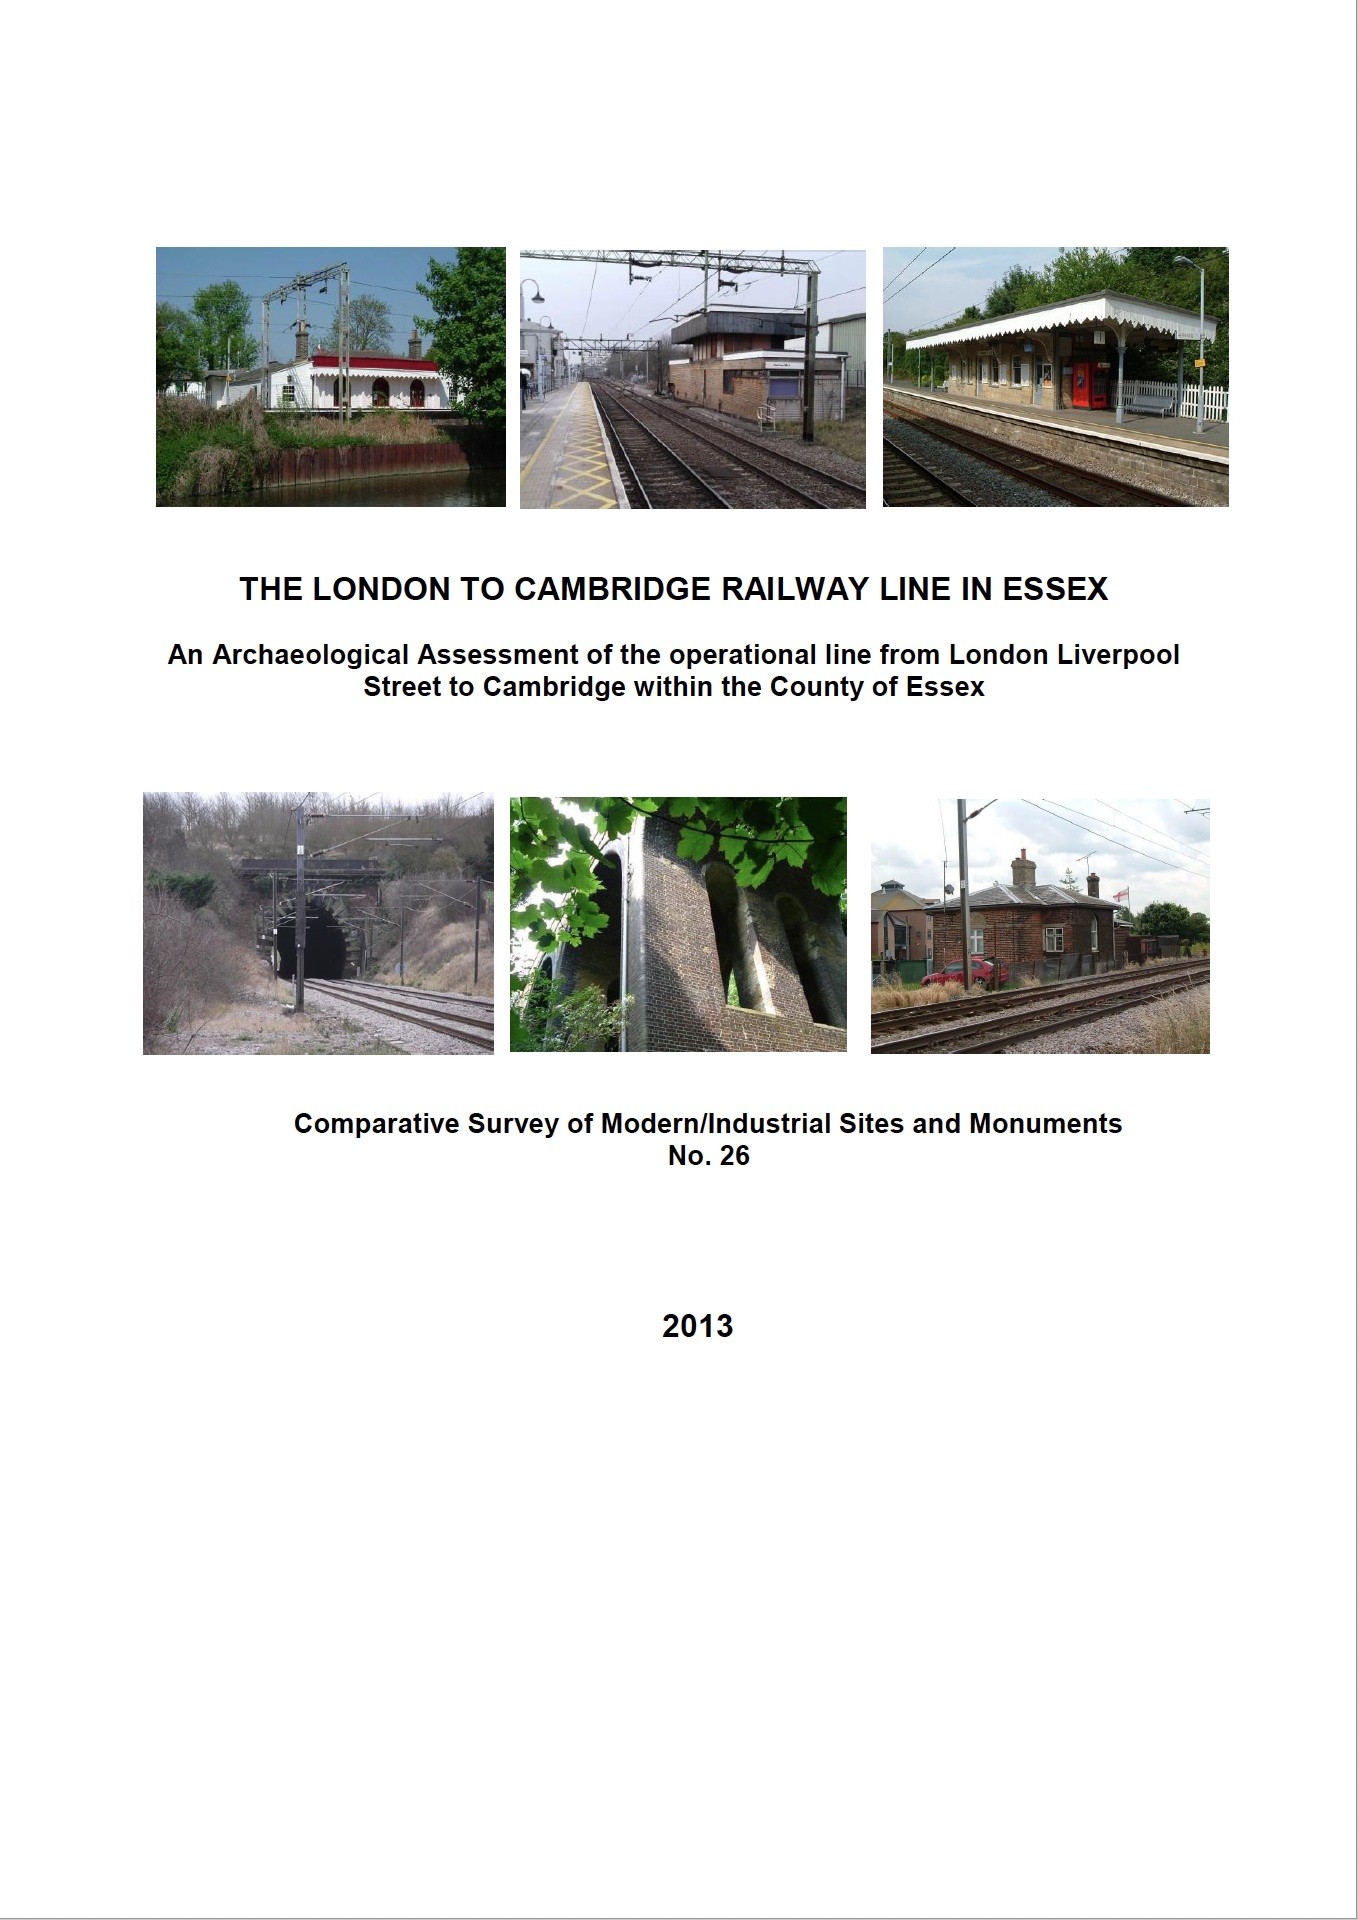 The London to Cambridge Line in Essex (2013) eiag illustration 1